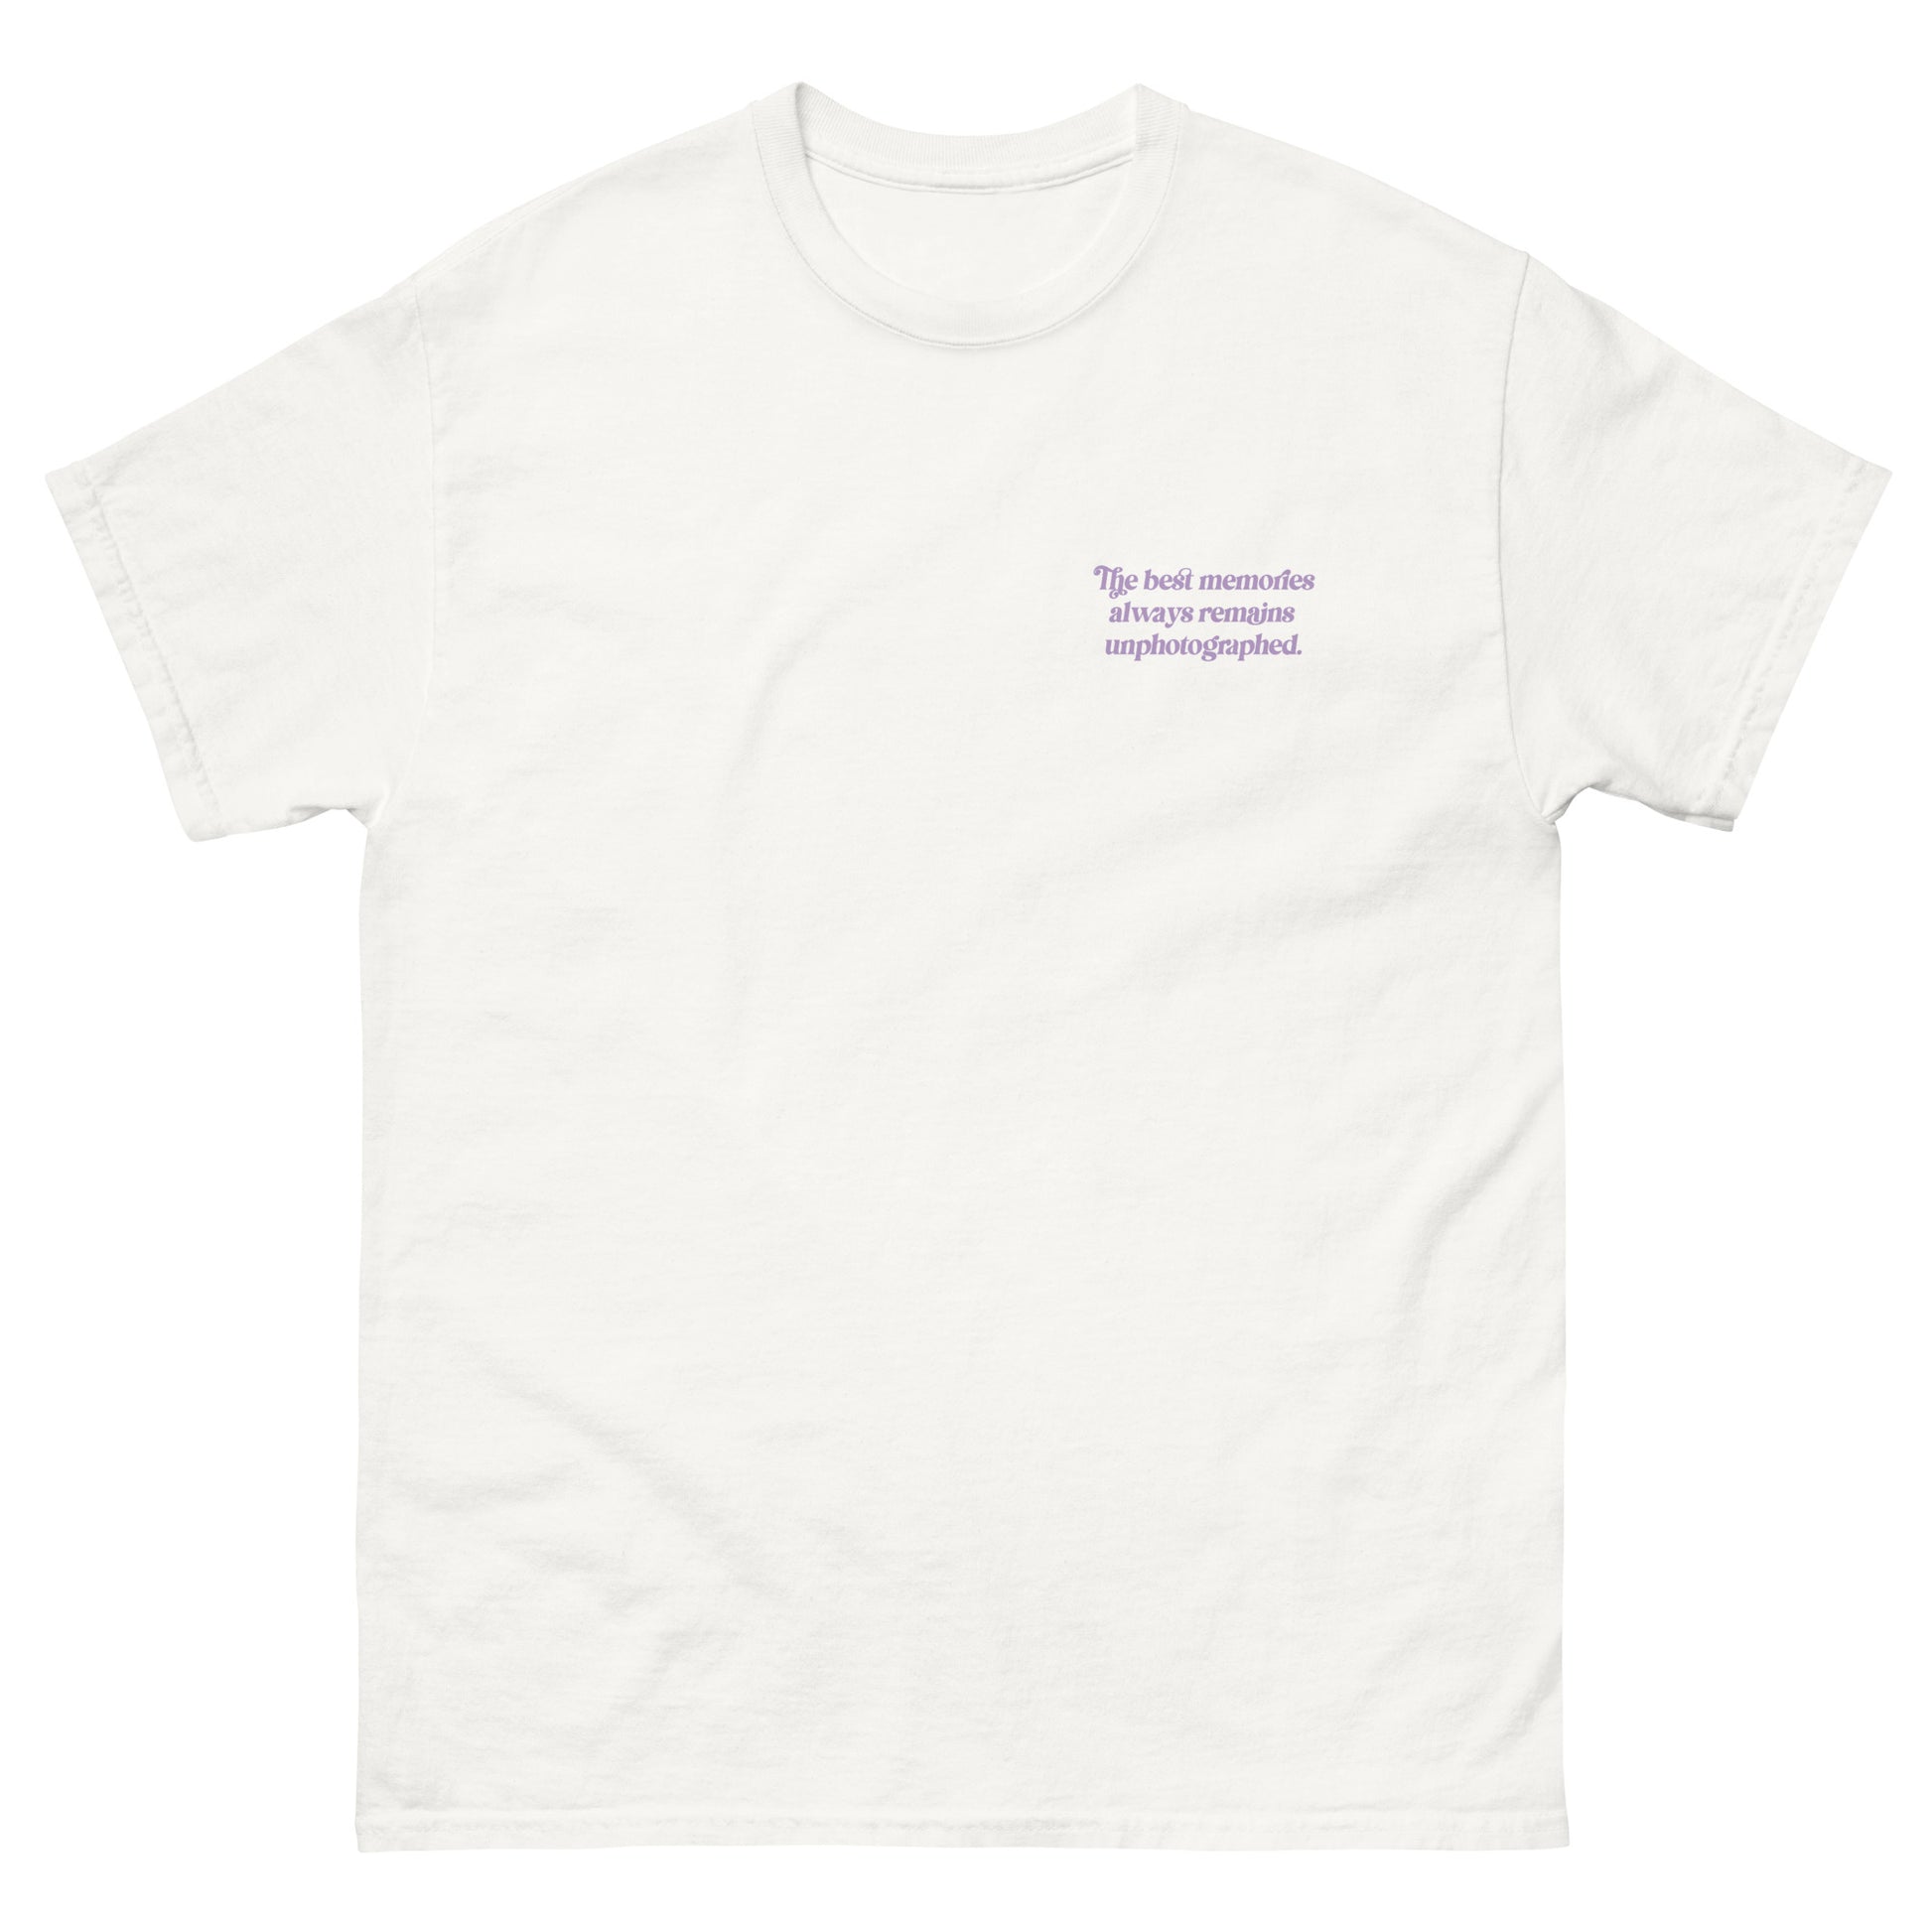 White High Quality Tee - Front Design with "The best memories always remains unphotographed " print on left chest - Back Design with a Phrase "The best memories always remains unphotographed." print and three pictures of sky.